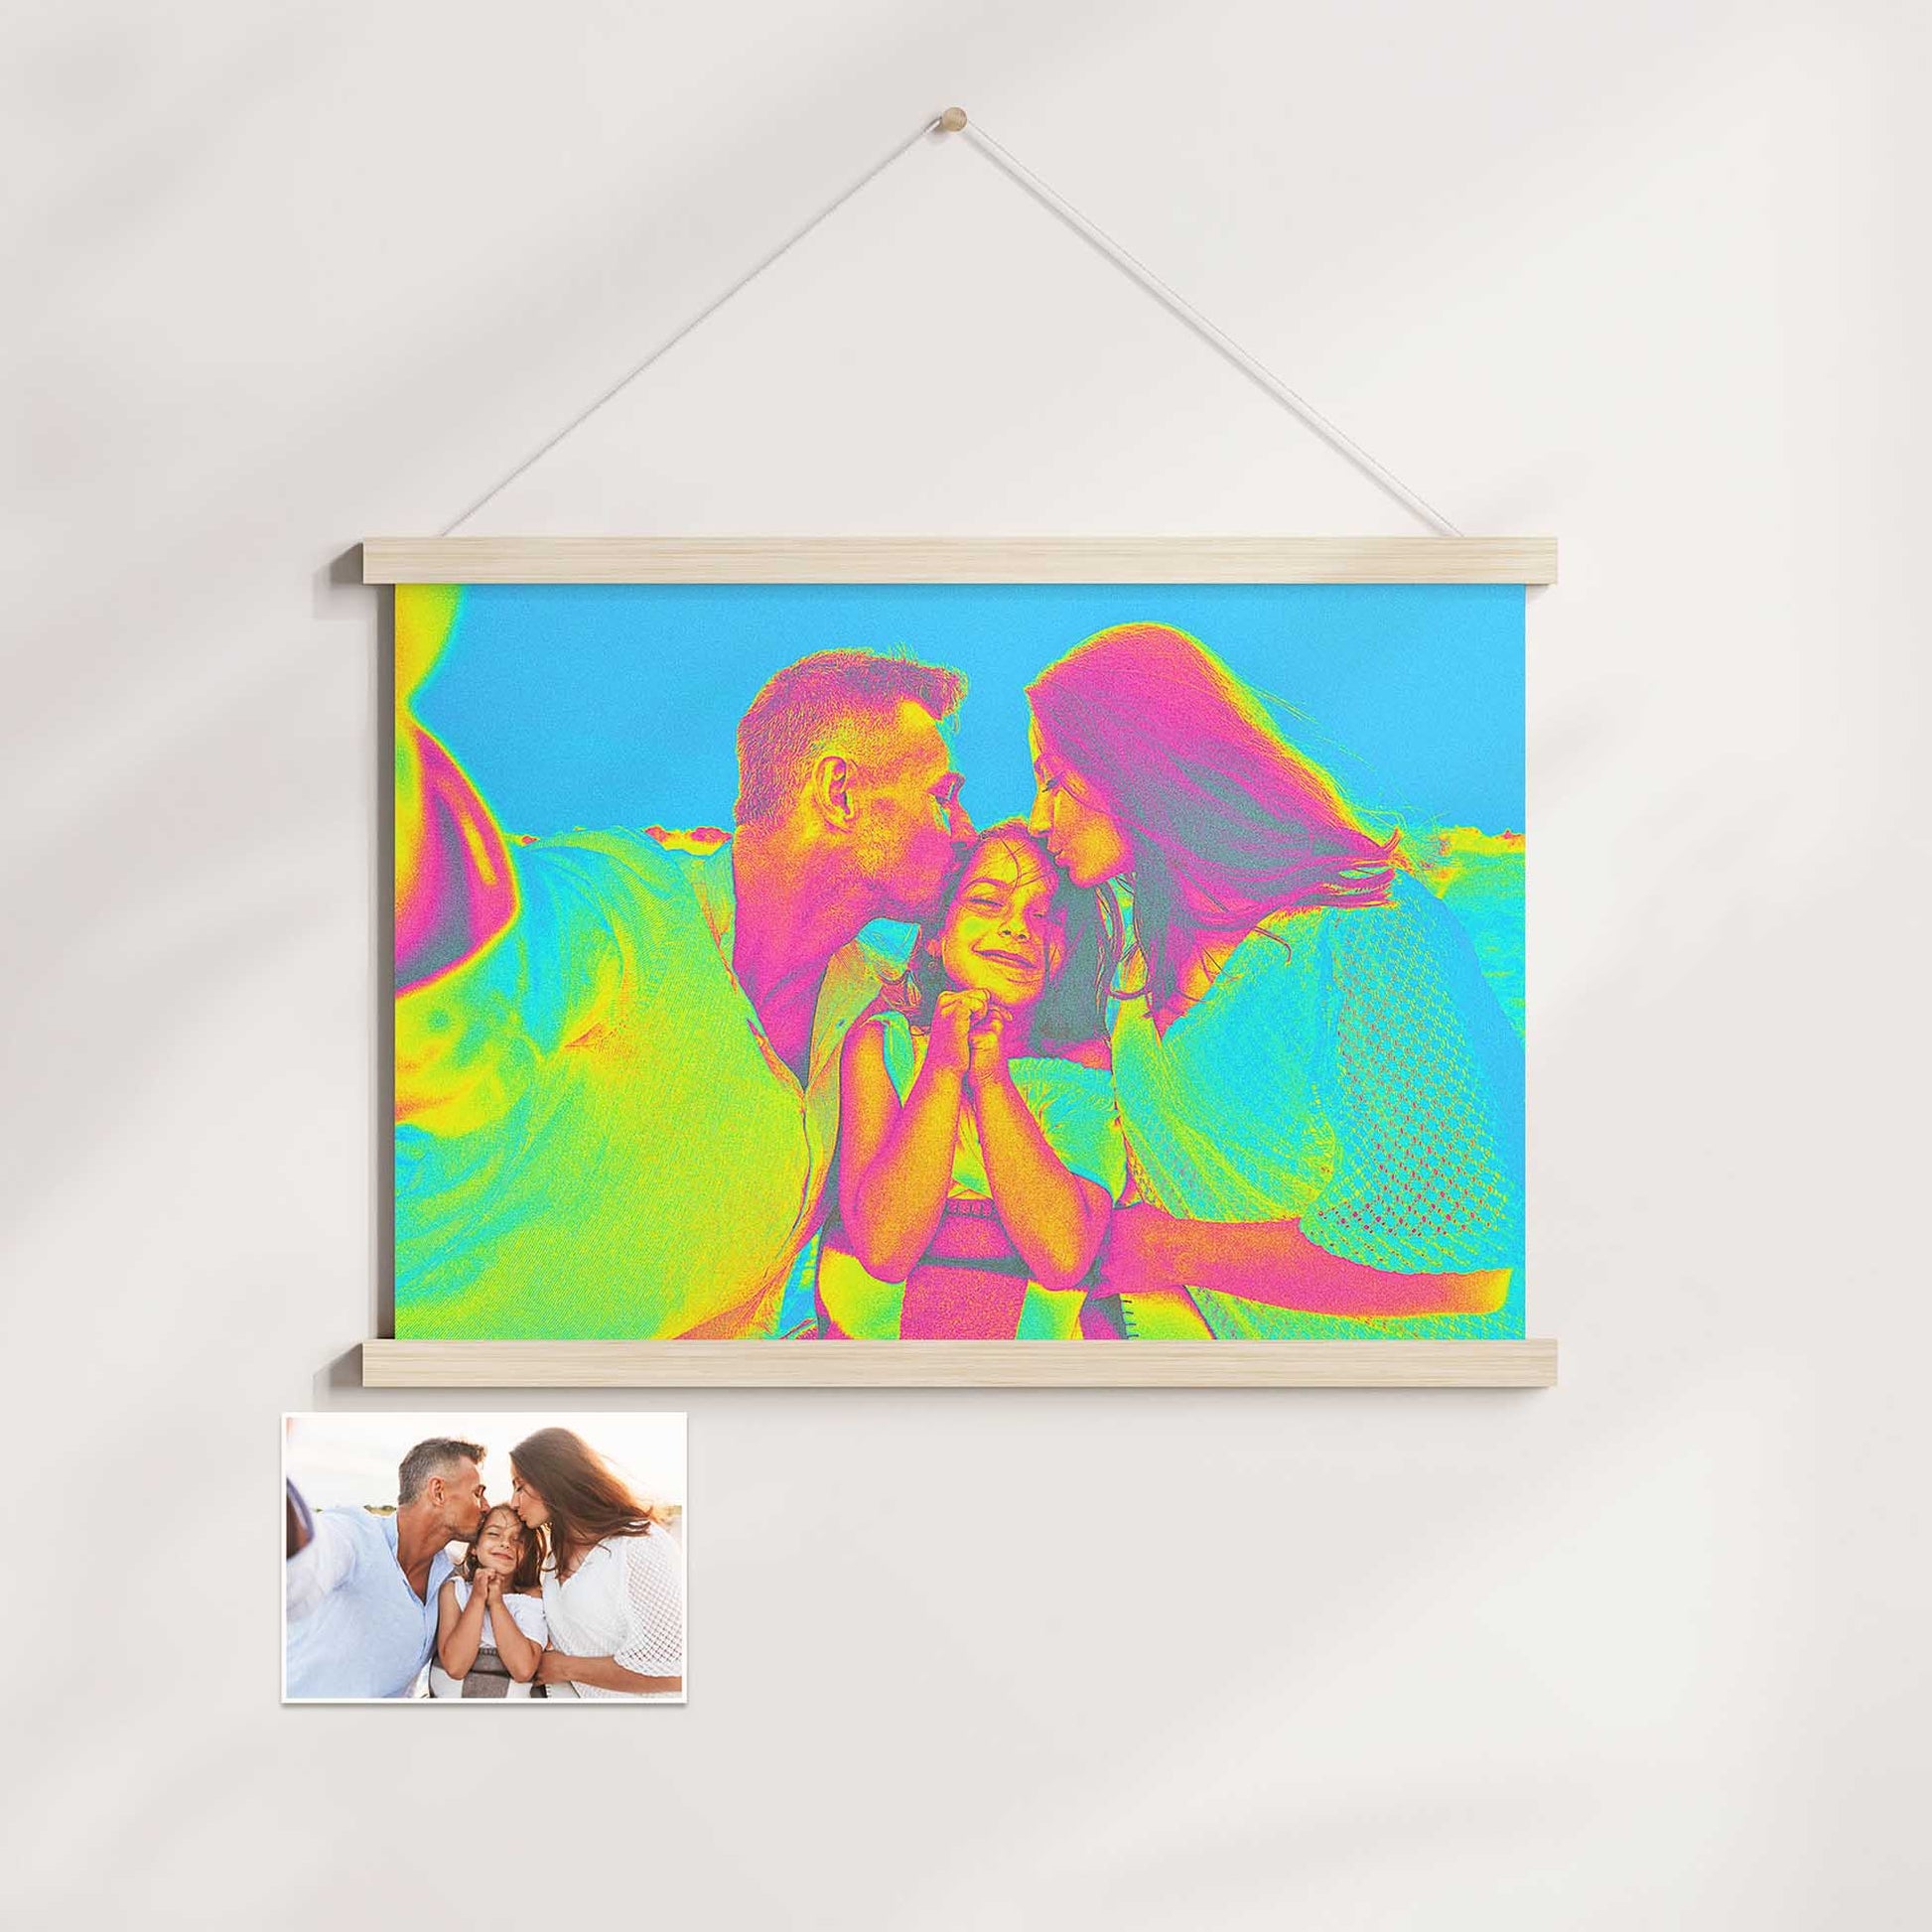 Immerse yourself in a world of vibrant imagination with our Personalised Acid Trip Poster Hanger. Transforming your photos into bold, cool artwork, it's available in blue, pink, green, and yellow, with captivating textures